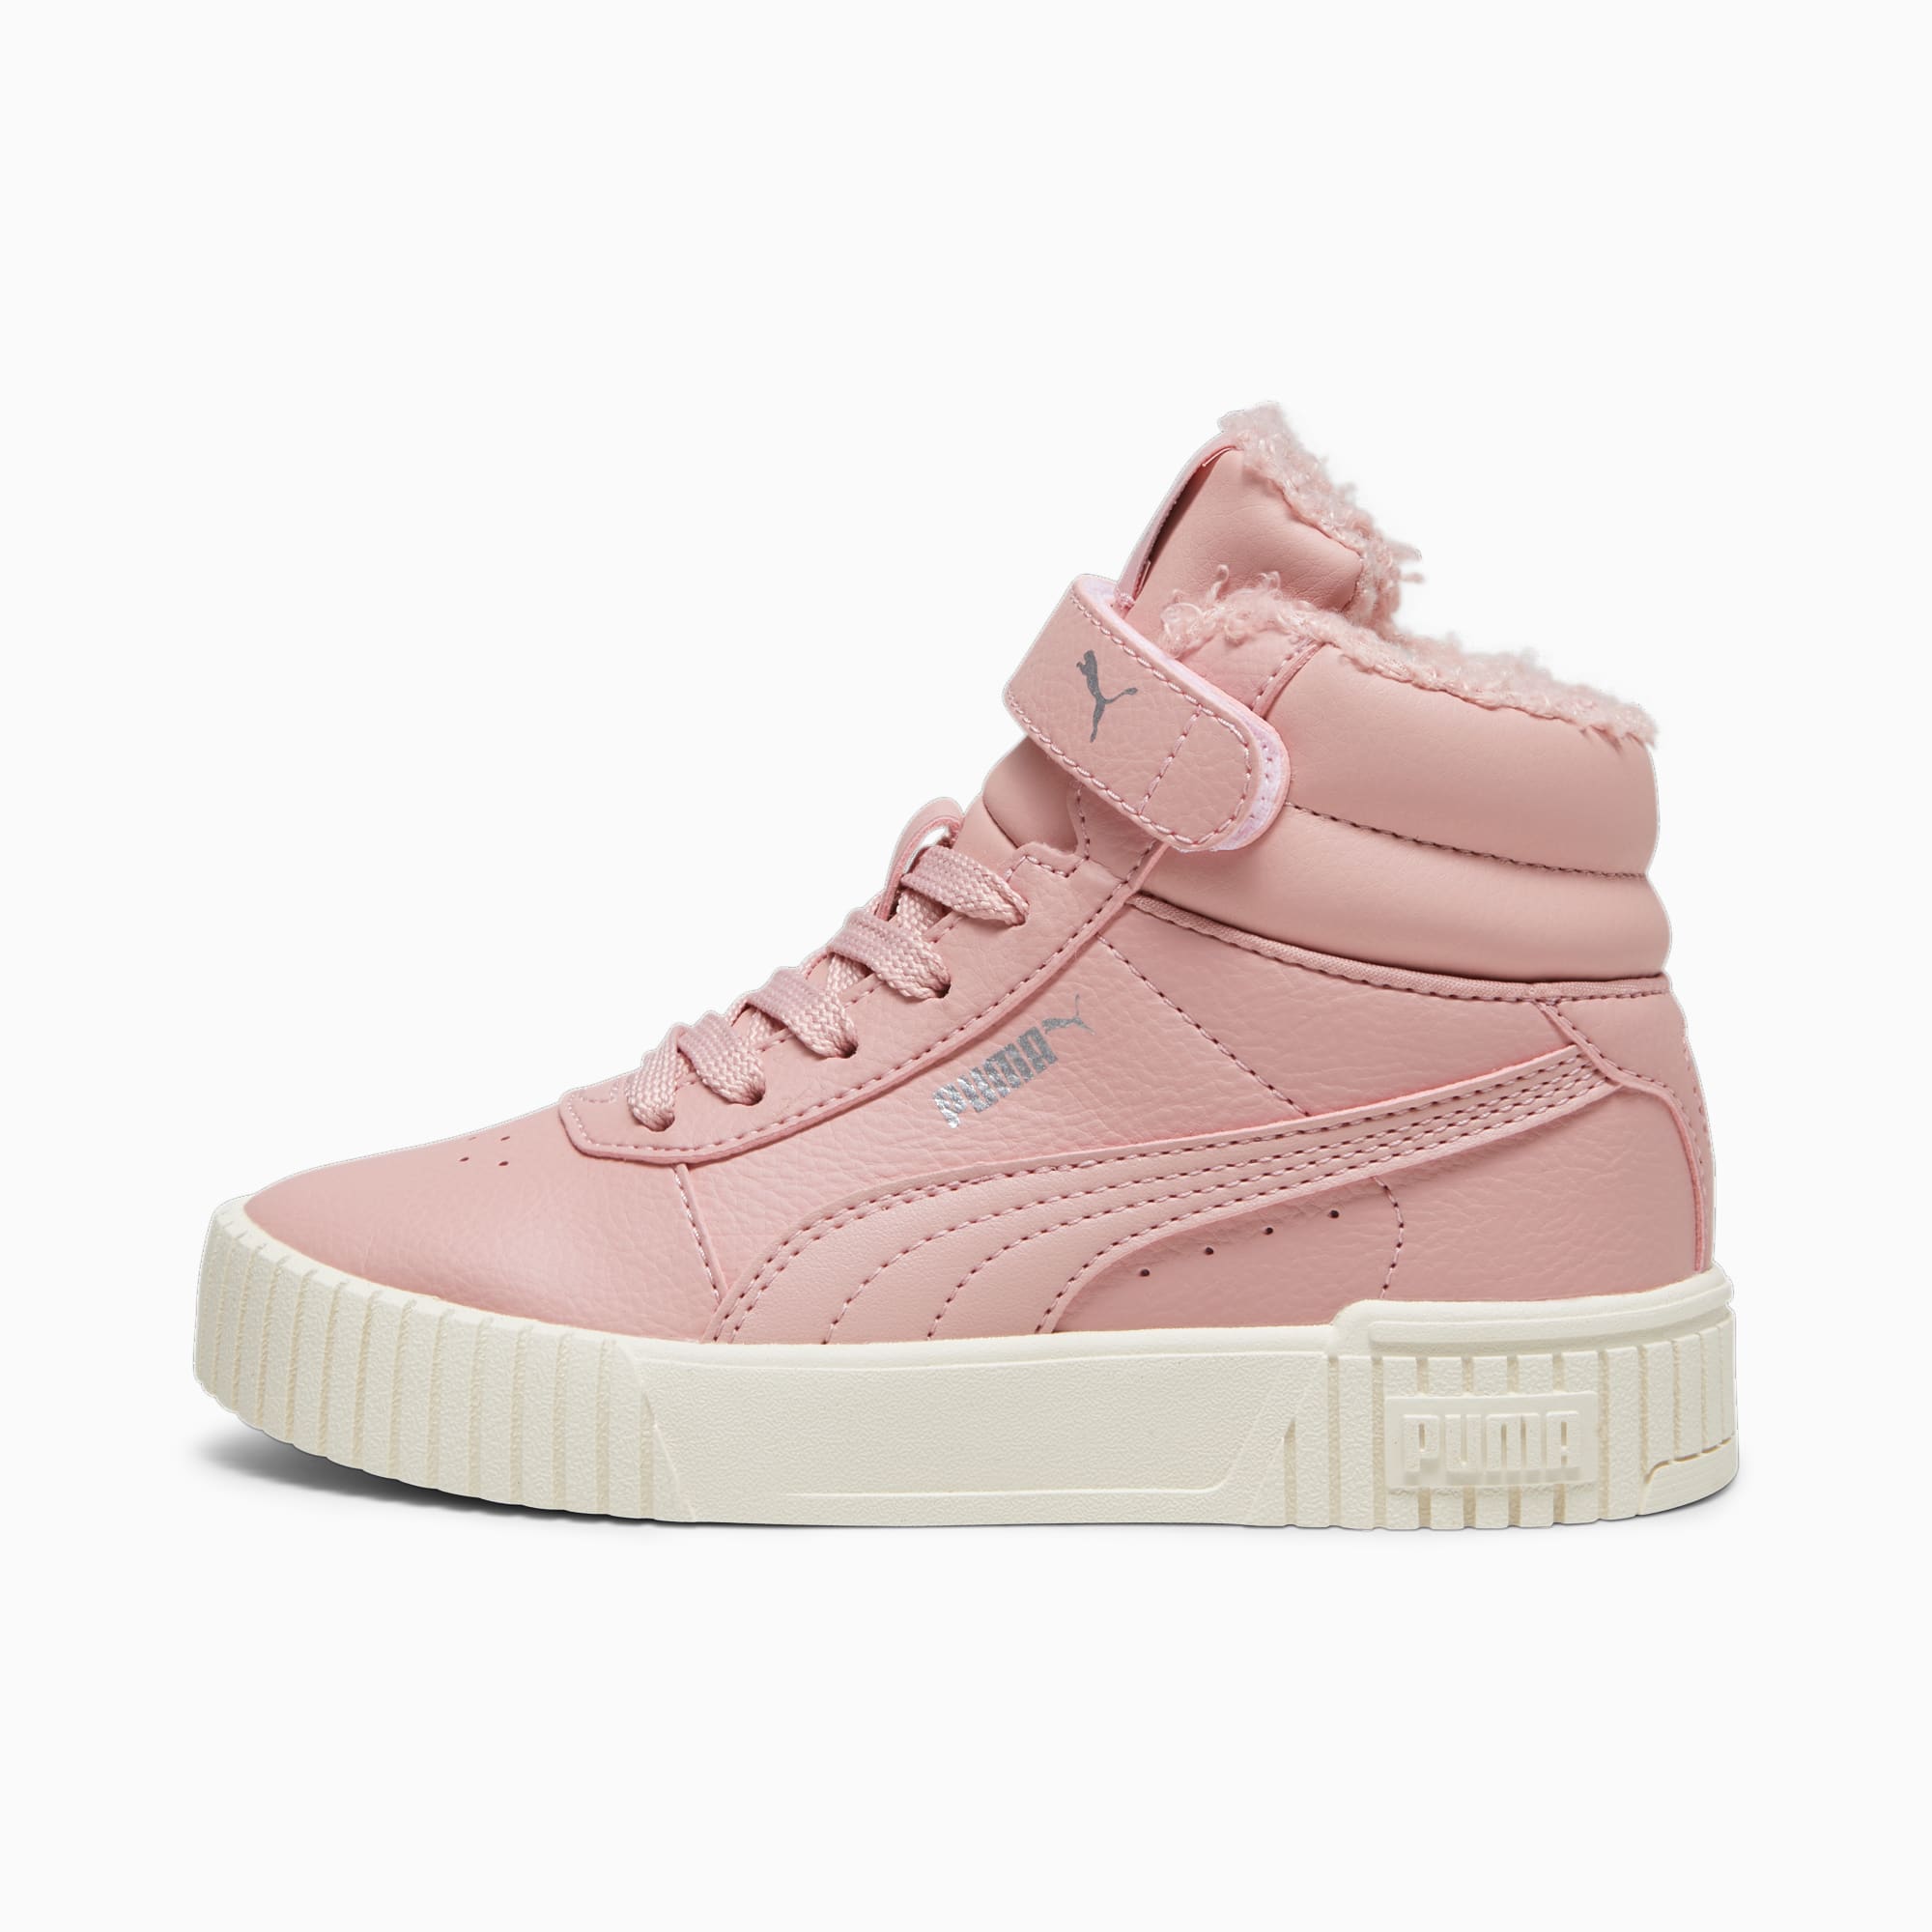 PUMA Carina 2.0 Mid Winter Sneakers Kids, Future Pink/Silver/Alpine Snow, Size 34,5, Shoes